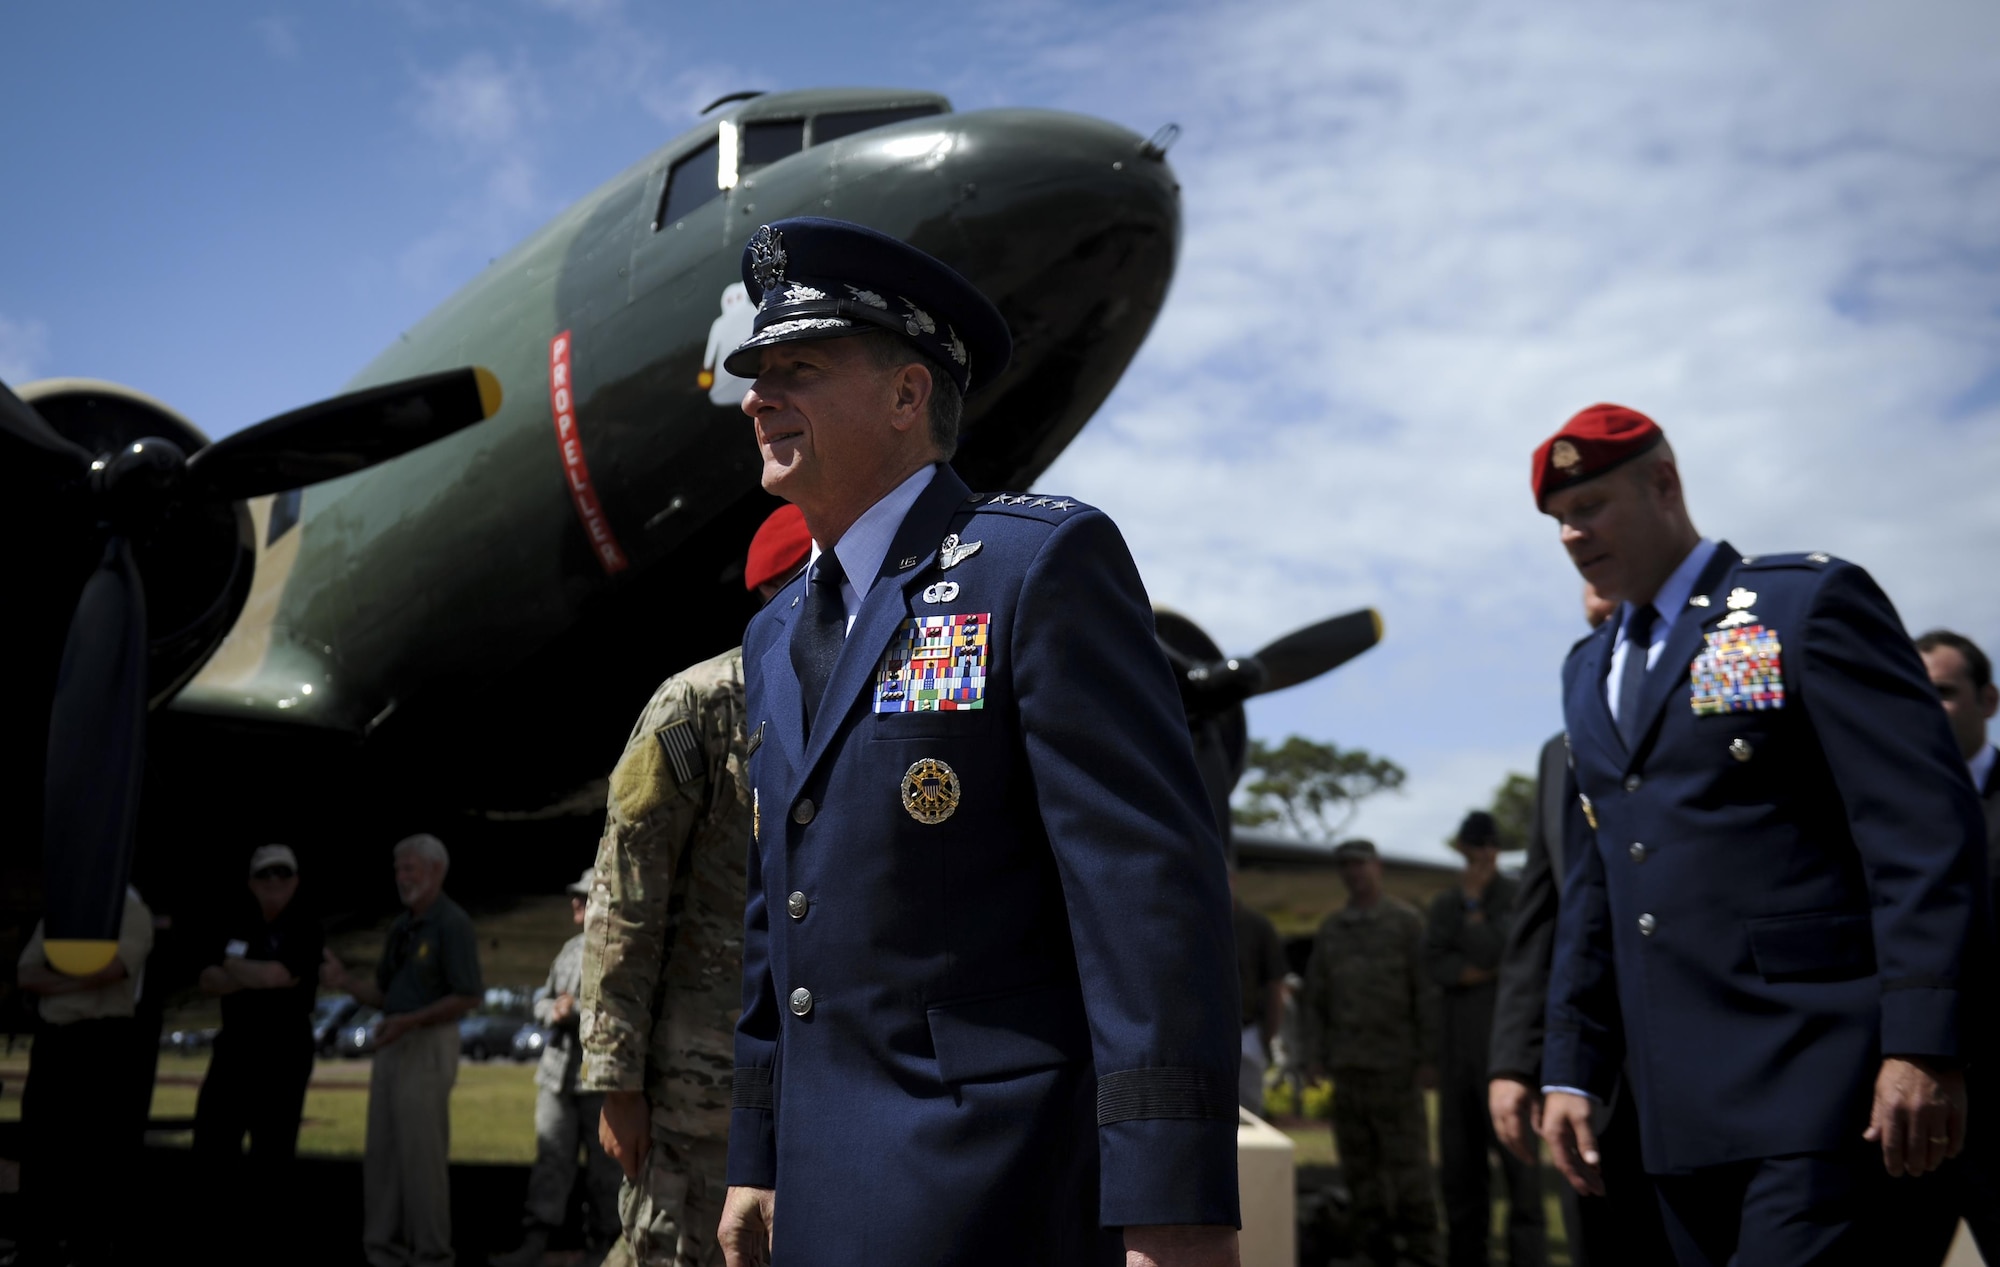 Chief of Staff of the Air Force Gen. David L. Goldfein, marches as a part of the official party for a dual Air Force Cross ceremony, April 20, 2017, at Hurlburt Field, Fla. Master Sgt. (Ret.) Keary Miller, a retired Special Tactics pararescueman from the Air National Guard’s 123rd Special Tactics Squadron, and Chris Baradat, a combat controller since separated, both received Air Force Crosses for their actions in combat, which were upgraded from Silver Star medals after a service-wide review. (U.S. Air Force photo by Airman 1st Class Dennis Spain) 